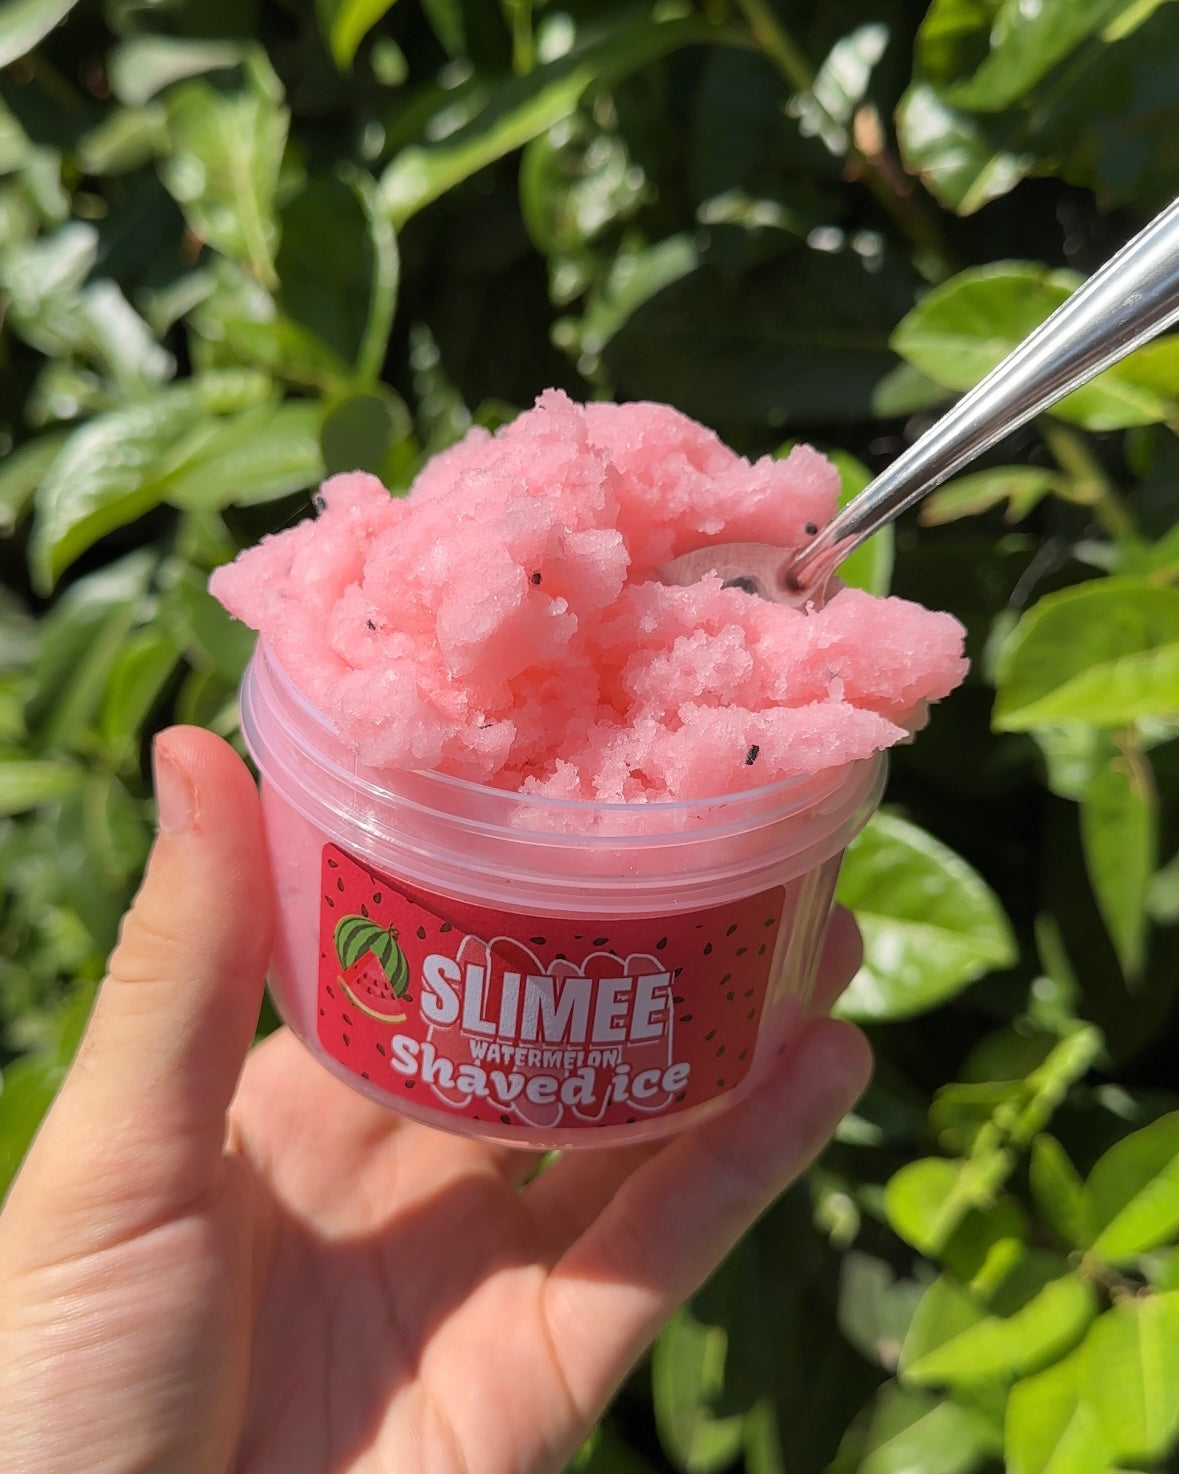 Watermelon shaved ice